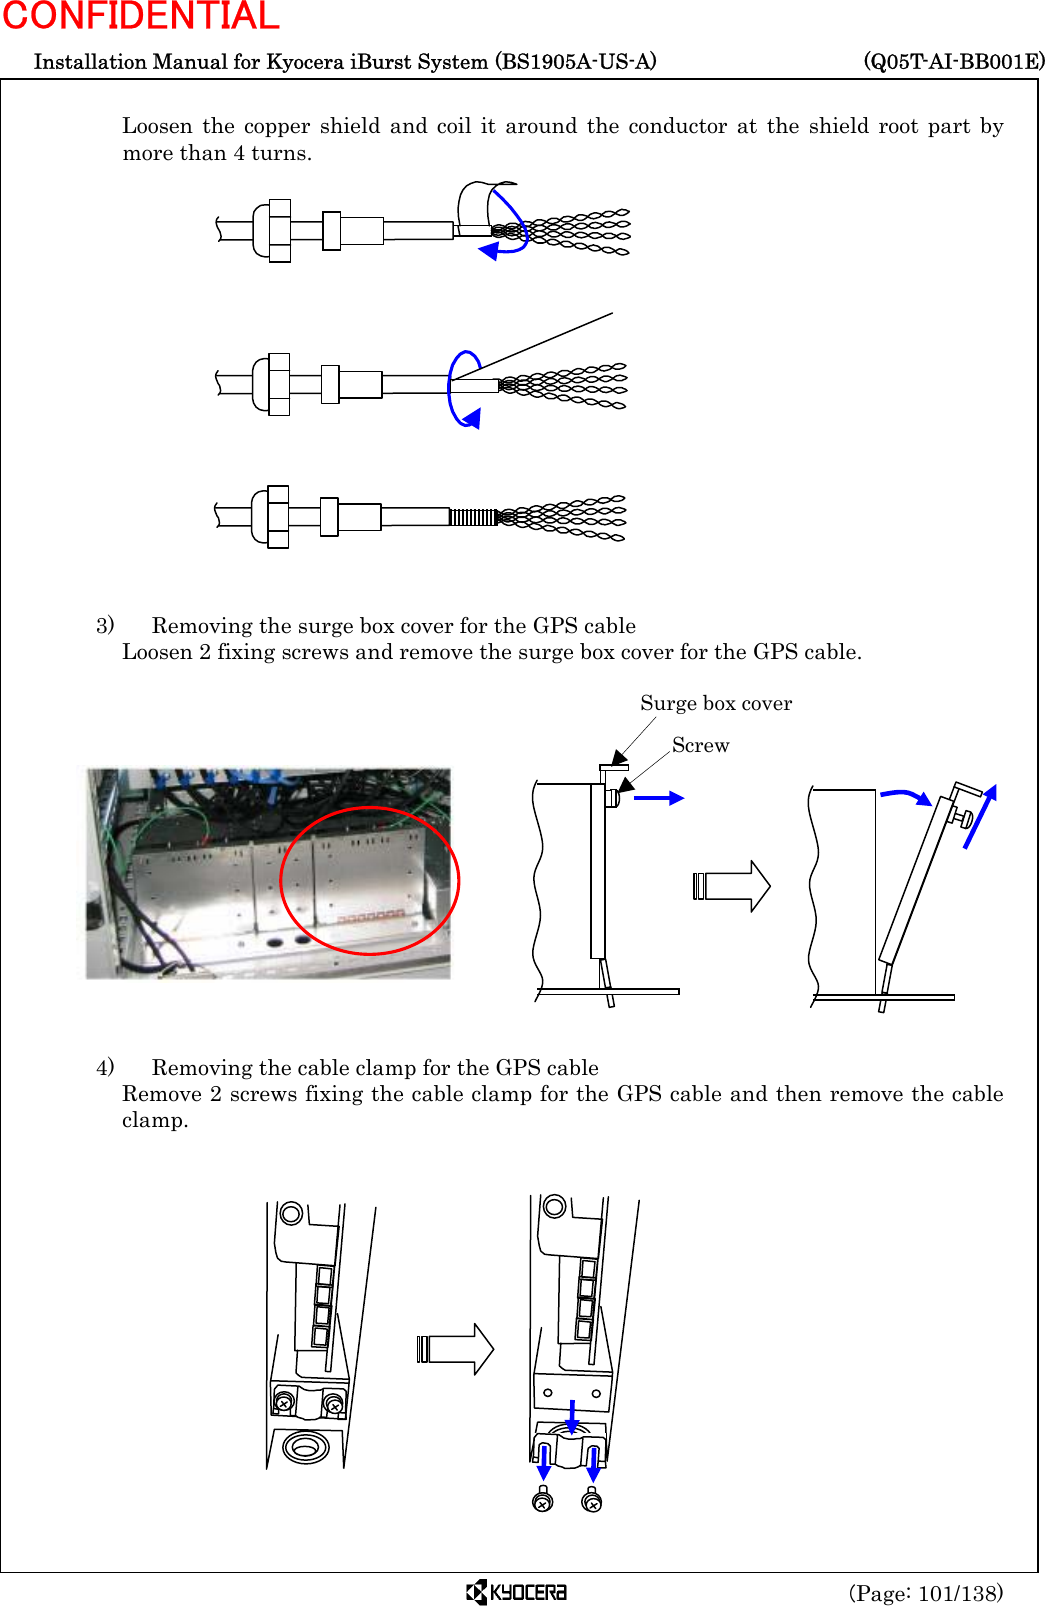  Installation Manual for Kyocera iBurst System (BS1905A-US-A)     (Q05T-AI-BB001E) (Page: 101/138) CONFIDENTIAL  Loosen the copper shield and coil it around the conductor at the shield root part by more than 4 turns.                  3)    Removing the surge box cover for the GPS cable Loosen 2 fixing screws and remove the surge box cover for the GPS cable.                4)    Removing the cable clamp for the GPS cable Remove 2 screws fixing the cable clamp for the GPS cable and then remove the cable clamp.              Surge box cover  Screw  